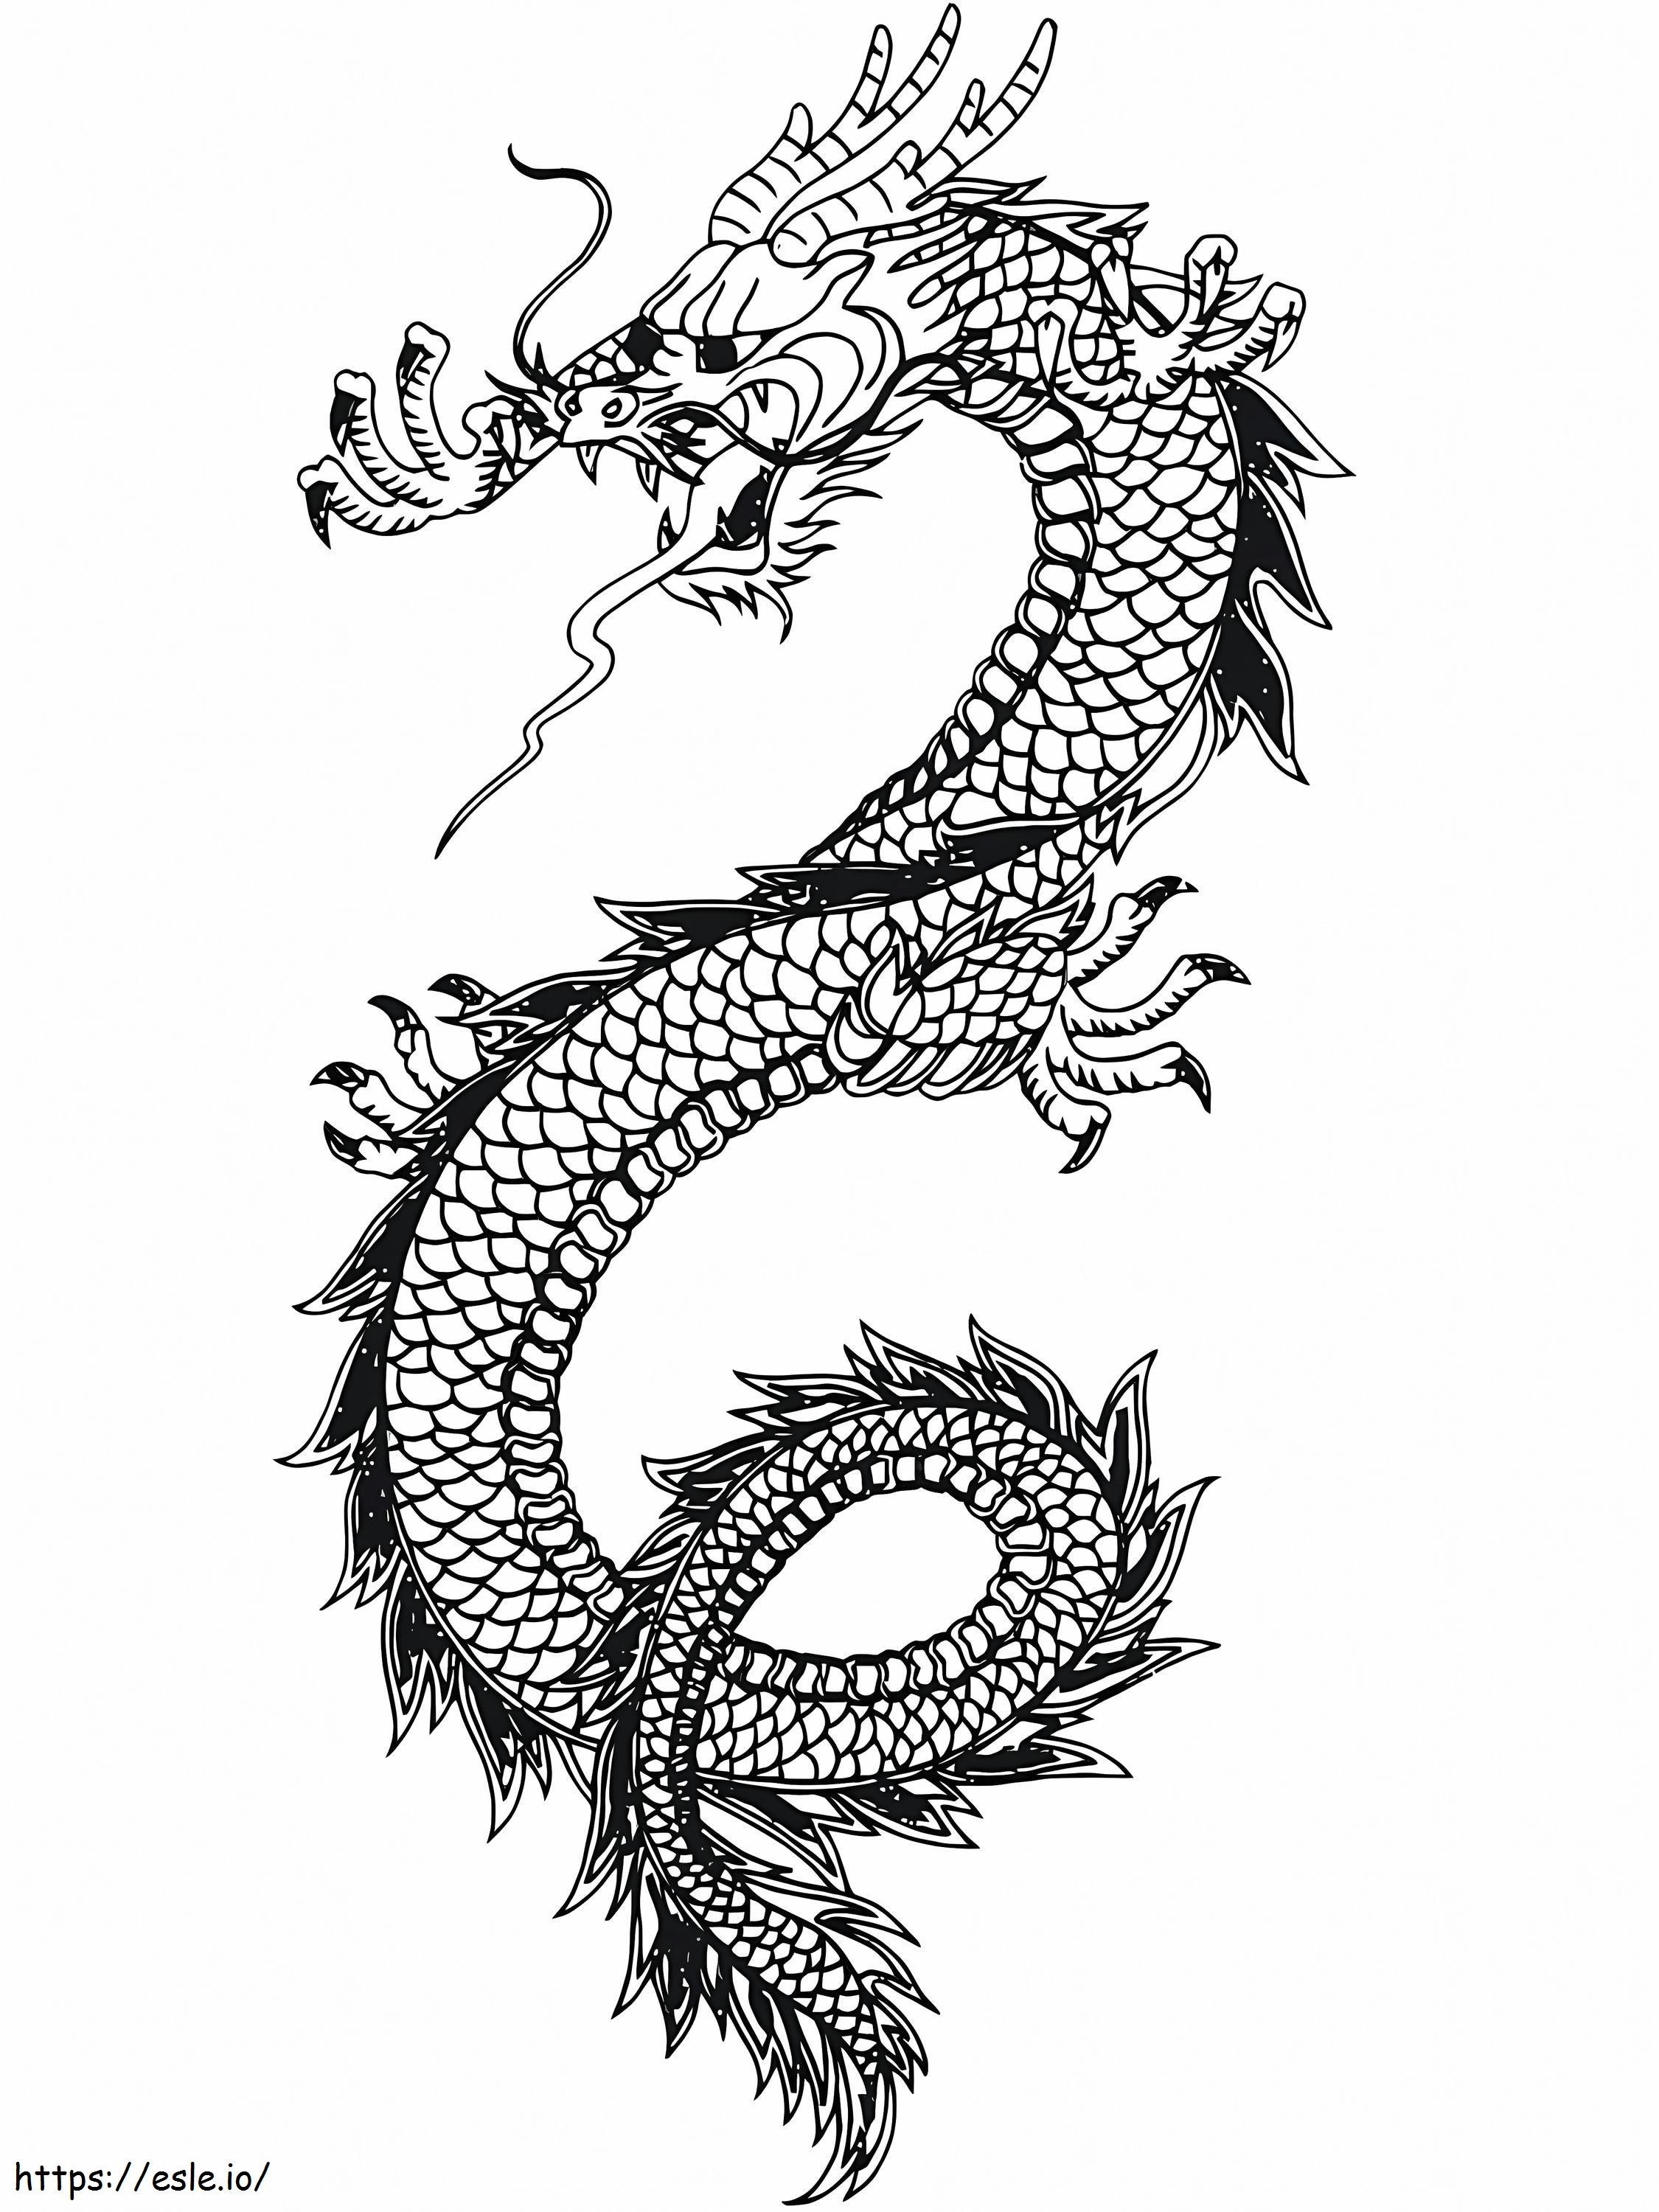 Great Chinese Dragon coloring page